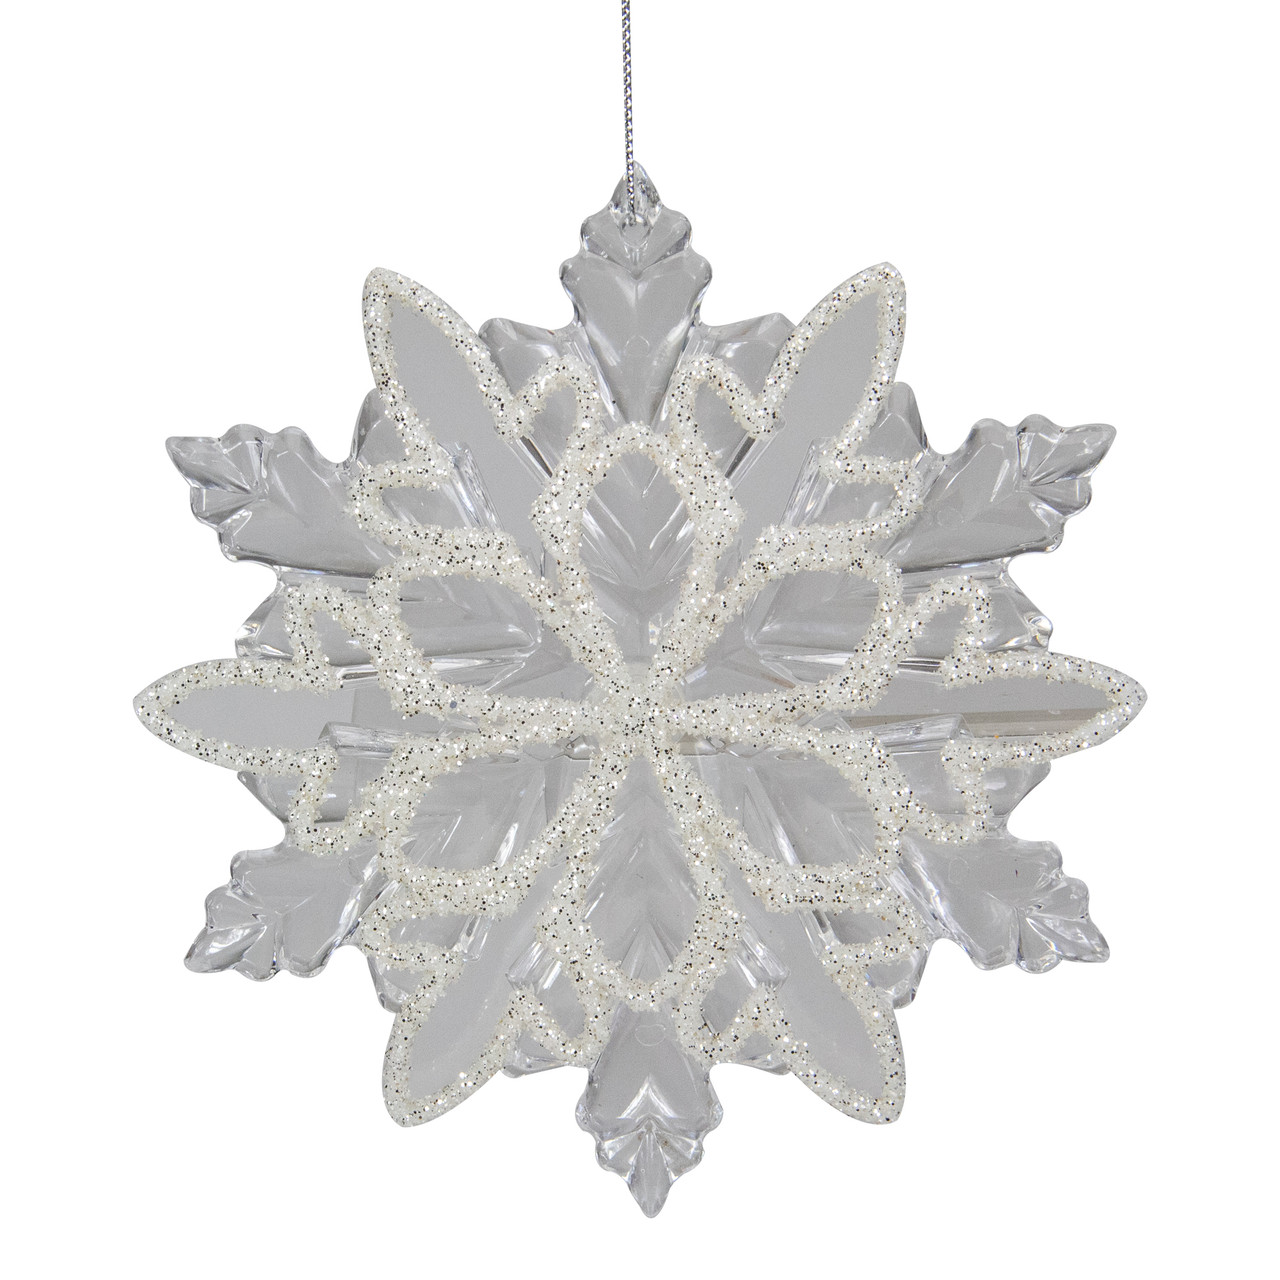 Snowflake Christmas Ornaments - White and Silver Glittered Snowflakes Each  is 8.5 D - Set of 4